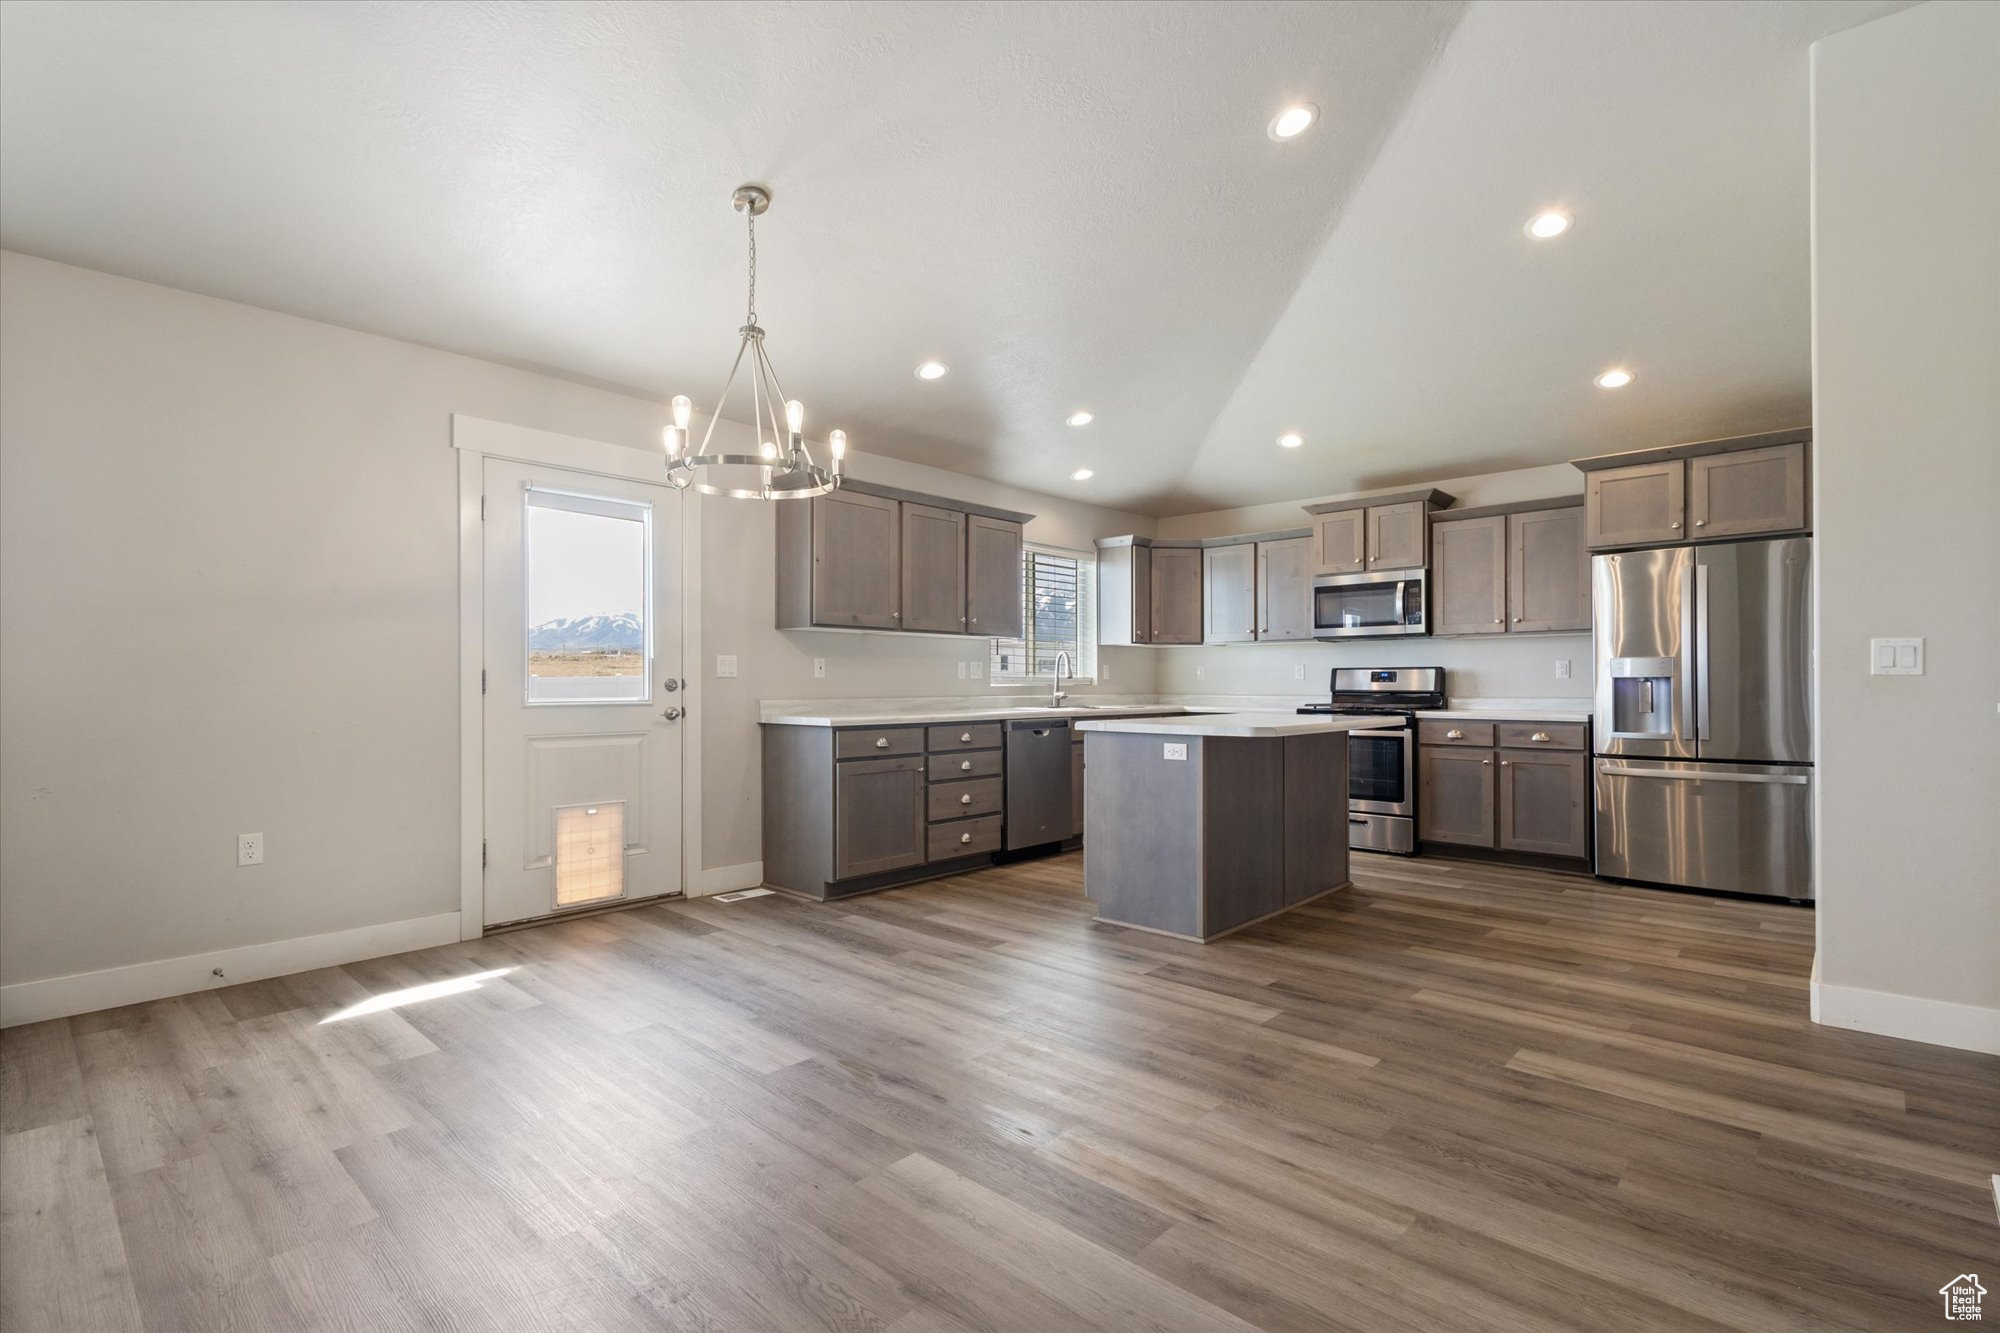 Kitchen featuring hanging light fixtures, dark hardwood / wood-style floors, stainless steel appliances, and a center island